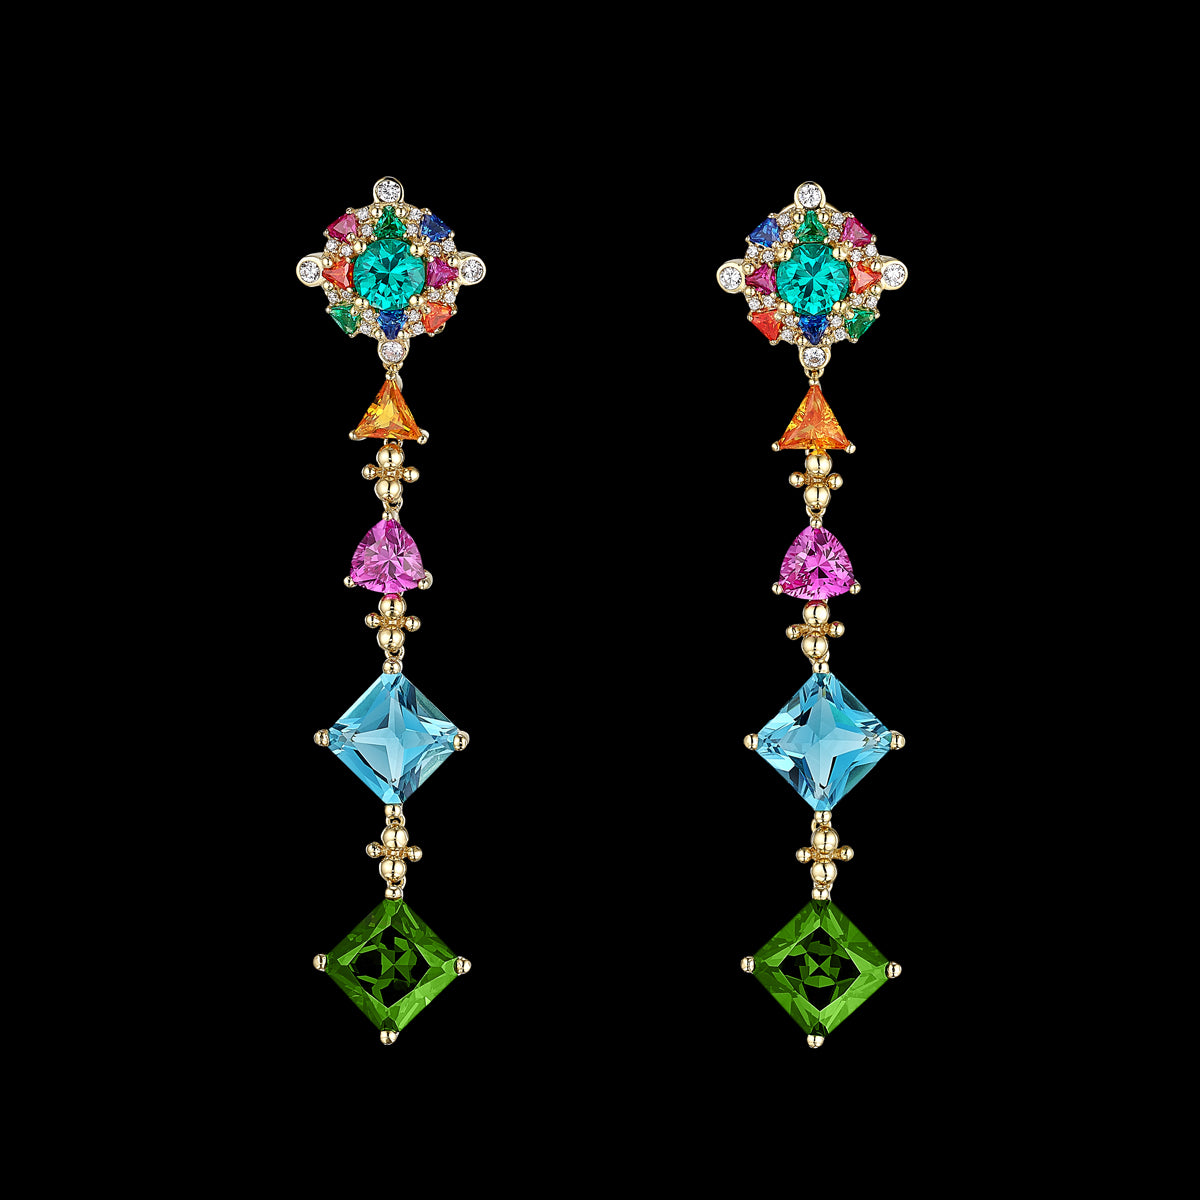 Tropical Paradise Drop Earrings, Earring, Anabela Chan Joaillerie - Fine jewelry with laboratory grown and created gemstones hand-crafted in the United Kingdom. Anabela Chan Joaillerie is the first fine jewellery brand in the world to champion laboratory-grown and created gemstones with high jewellery design, artisanal craftsmanship and a focus on ethical and sustainable innovations.